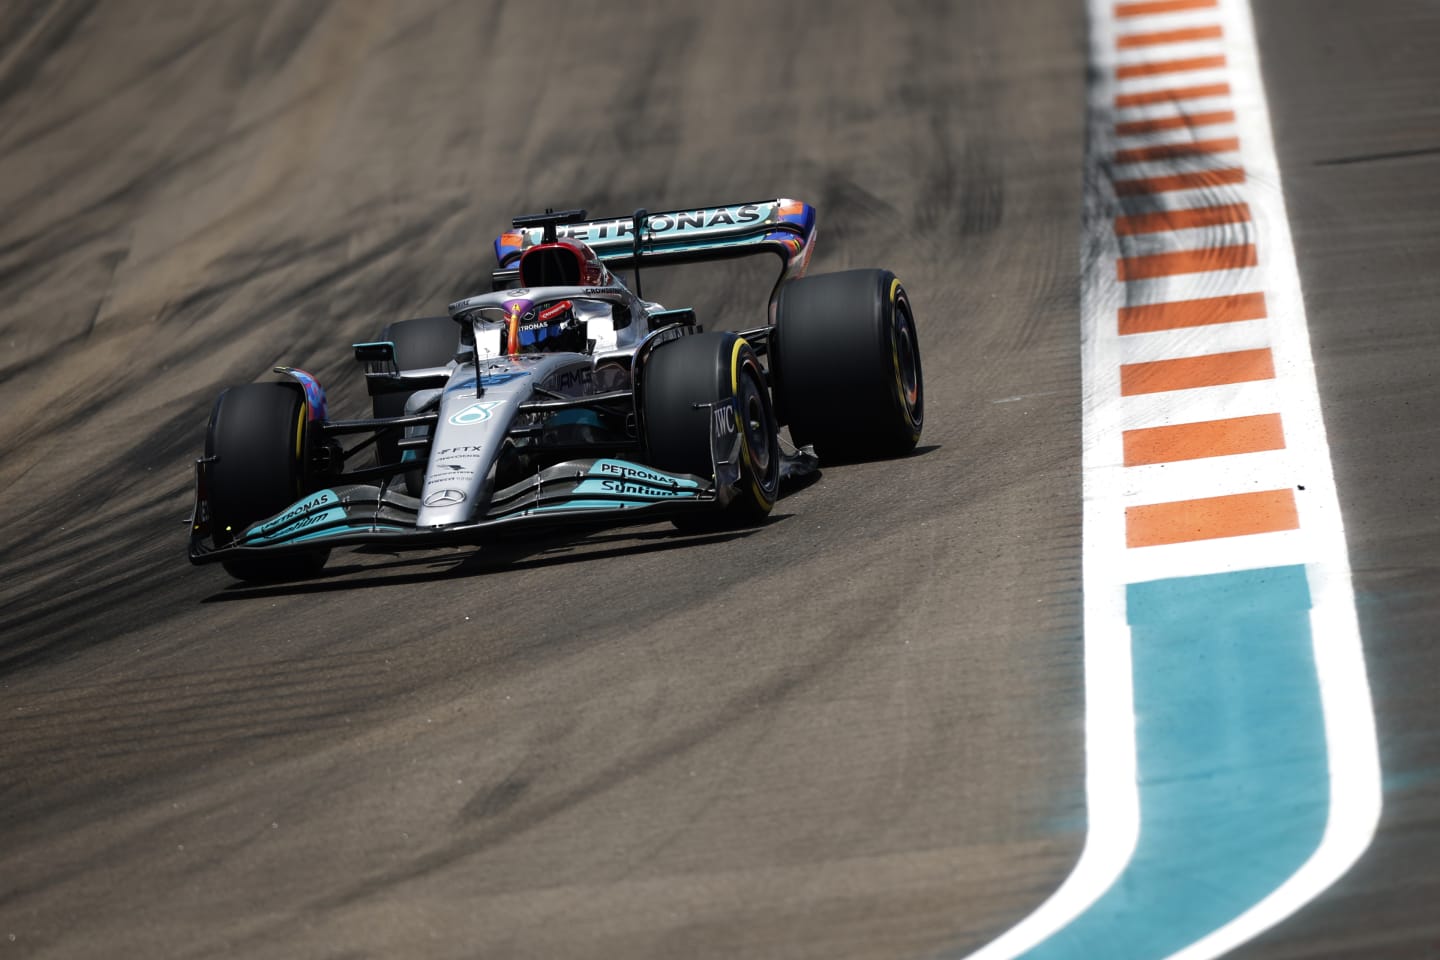 MIAMI, FLORIDA - MAY 07: George Russell of Great Britain driving the (63) Mercedes AMG Petronas F1 Team W13 on track during final practice ahead of the F1 Grand Prix of Miami at the Miami International Autodrome on May 07, 2022 in Miami, Florida. (Photo by Chris Graythen/Getty Images)